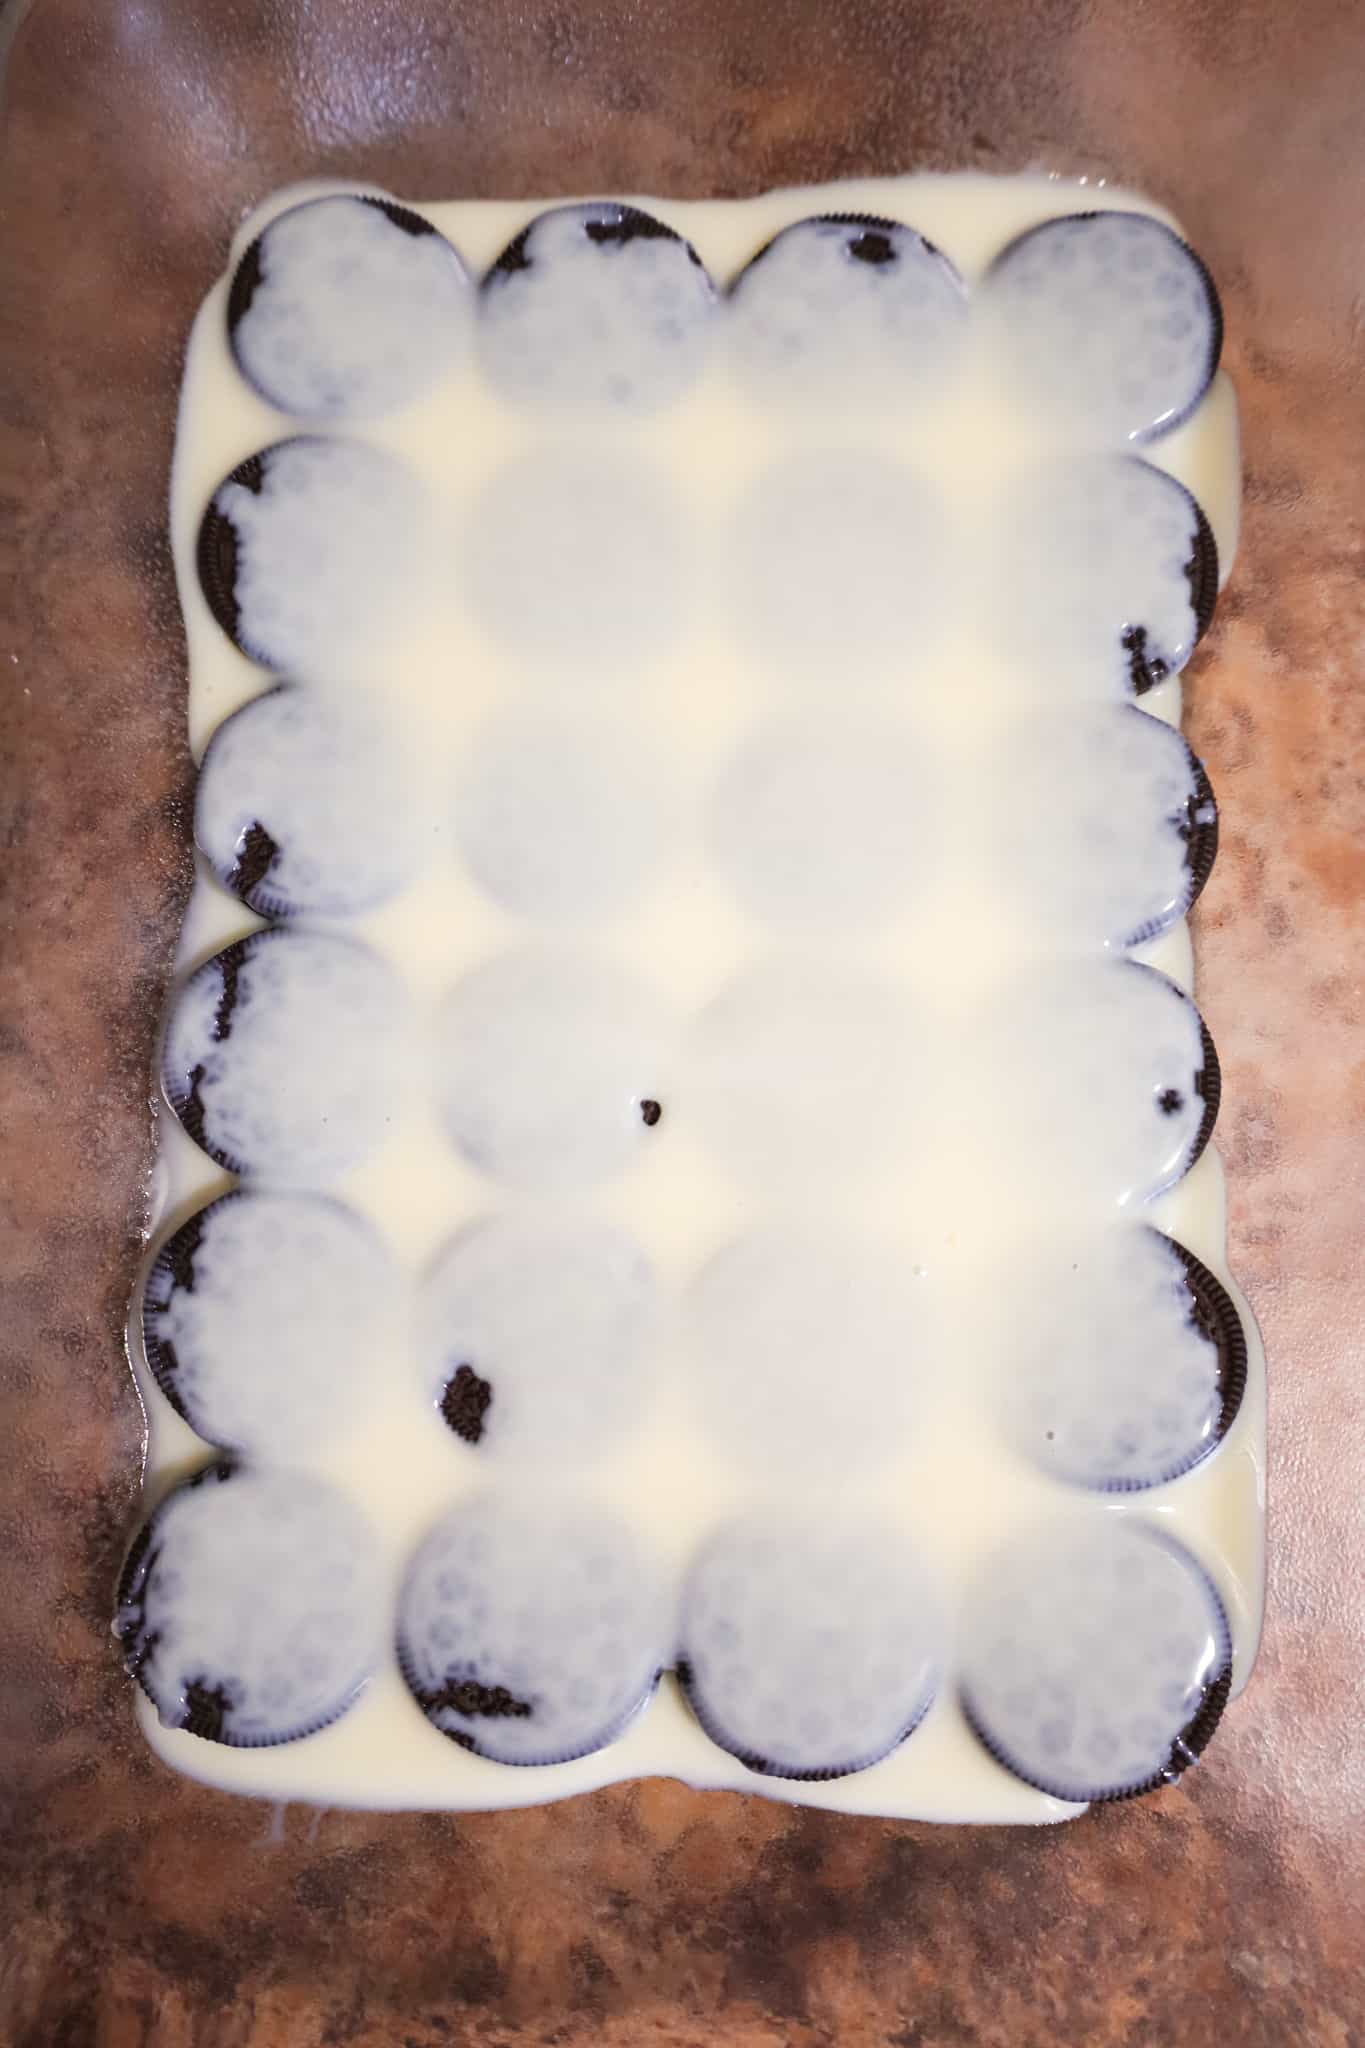 sweetened condensed milk poured over Oreo cookies in a baking dish